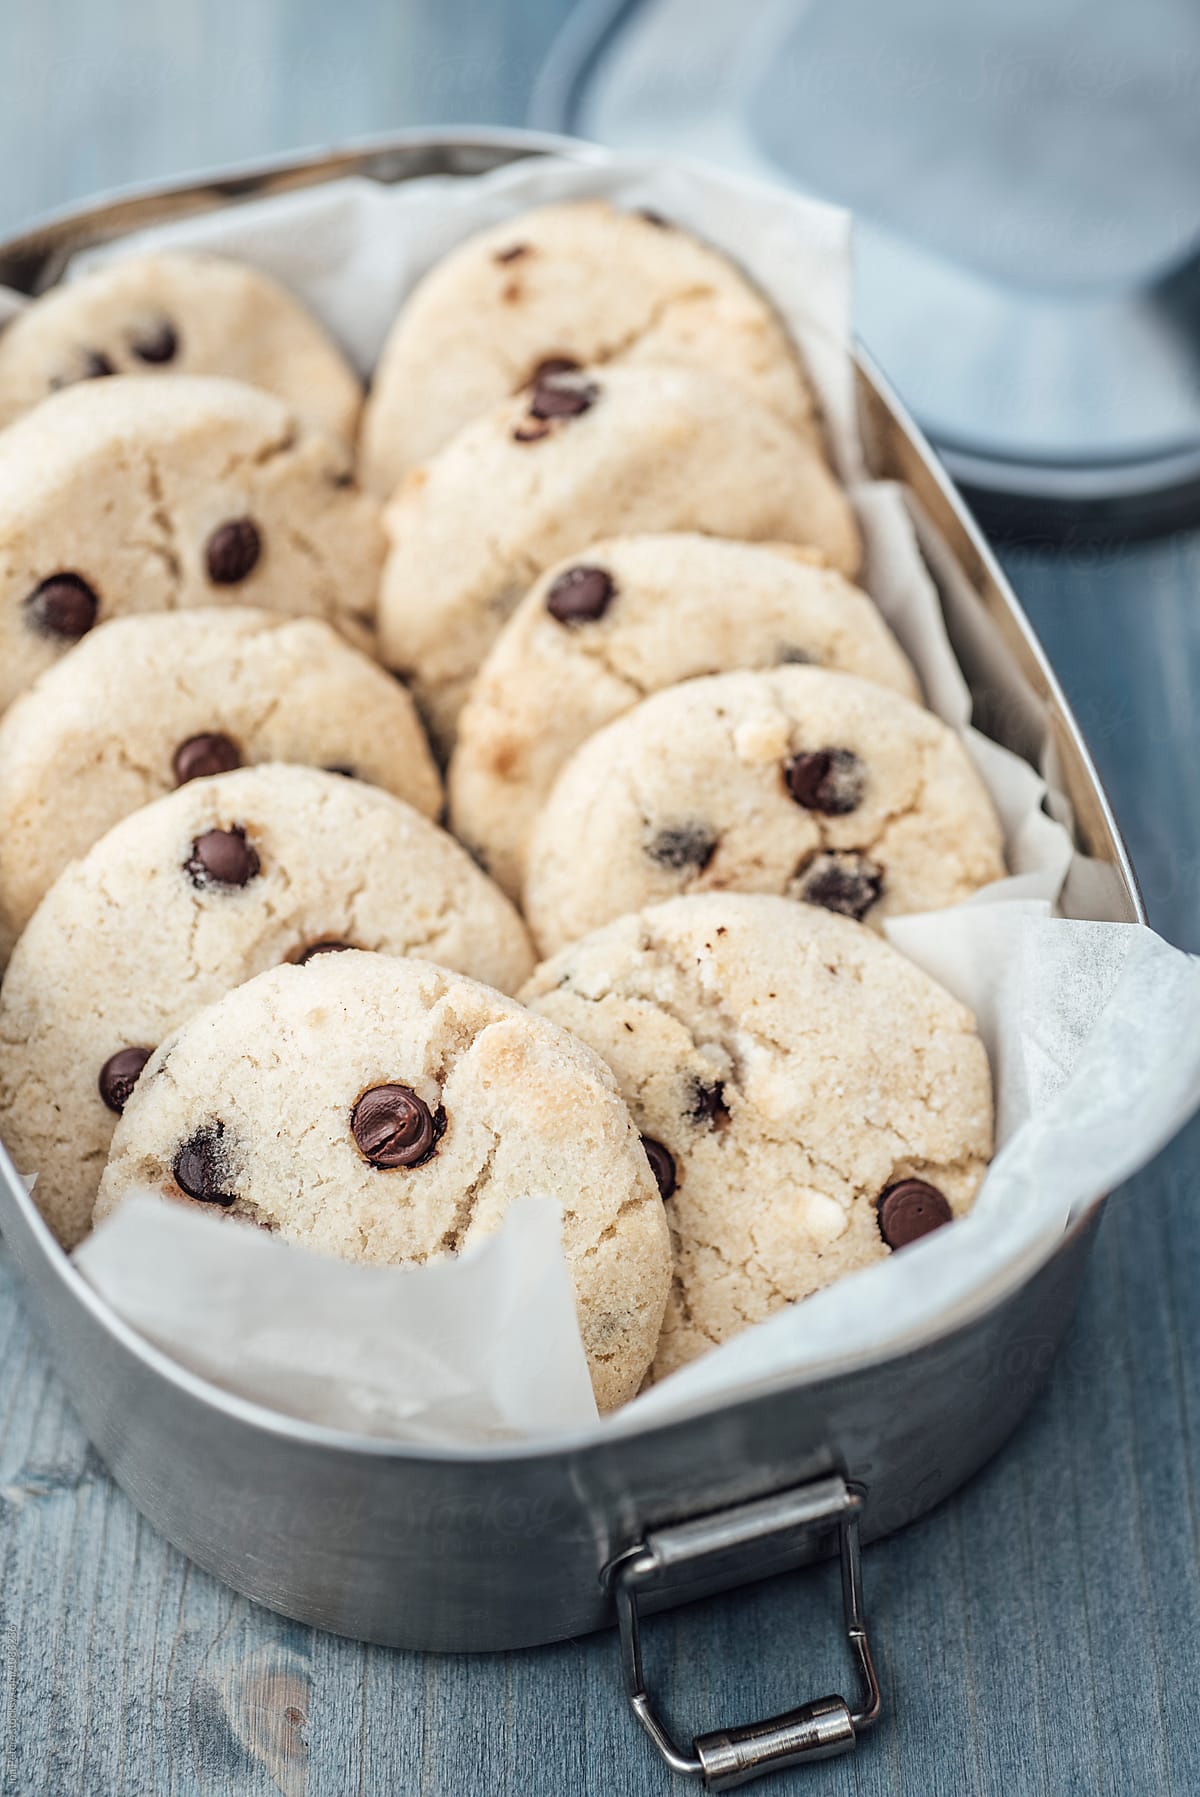 Food: Homemade glutenfree cocont cookies with chocolate chips